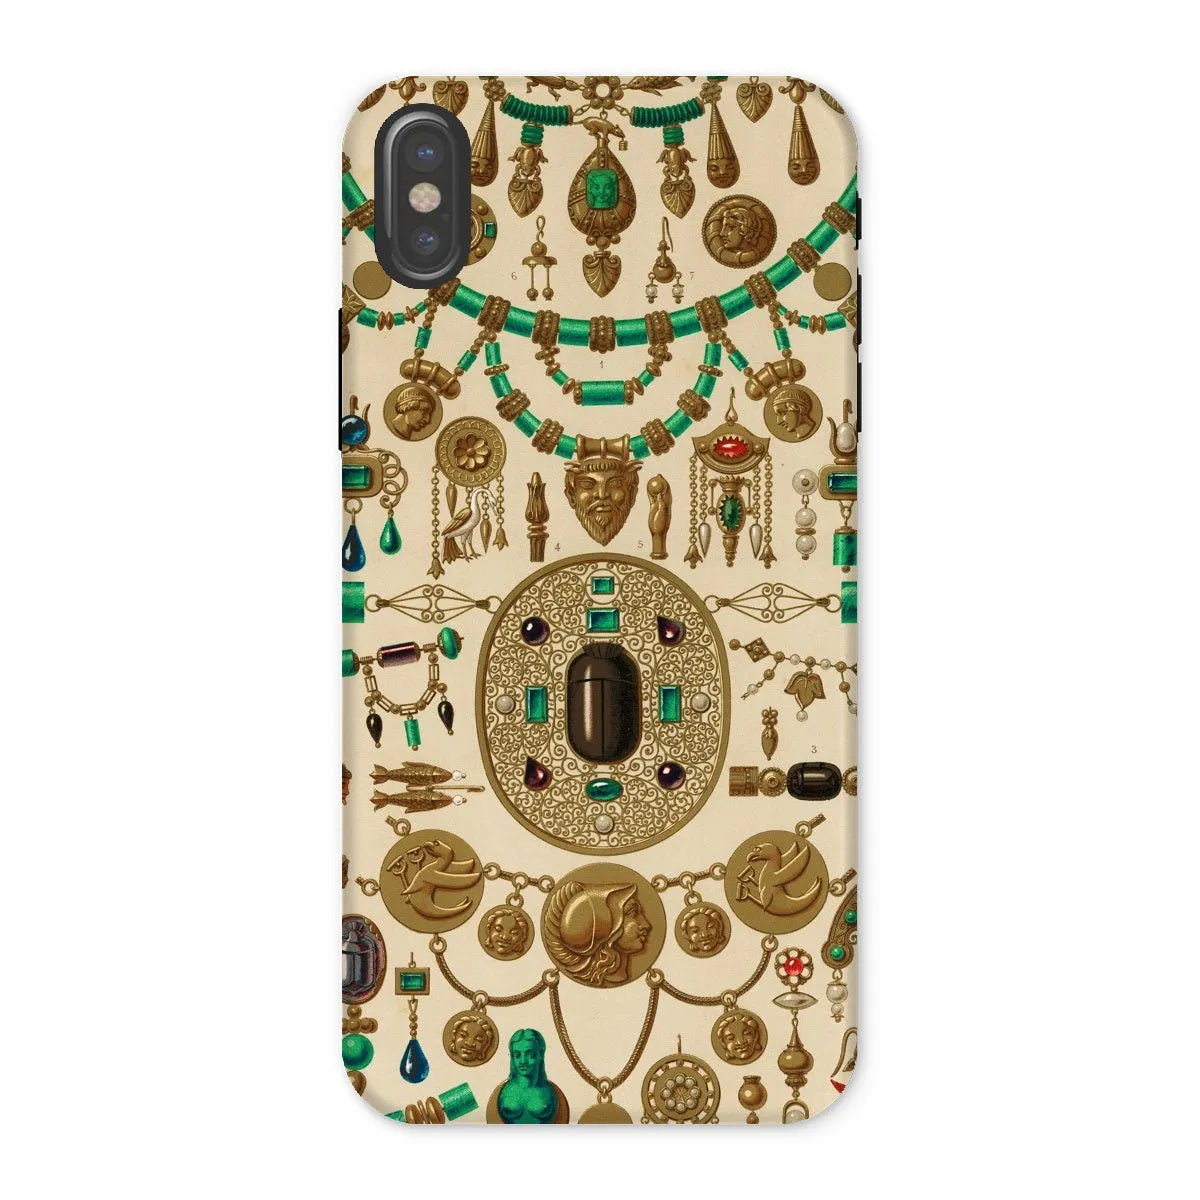 Etruscan Patterns From L’ornement Polychrome By Auguste Racinet Tough Phone Case - Iphone x / Matte - Mobile Phone